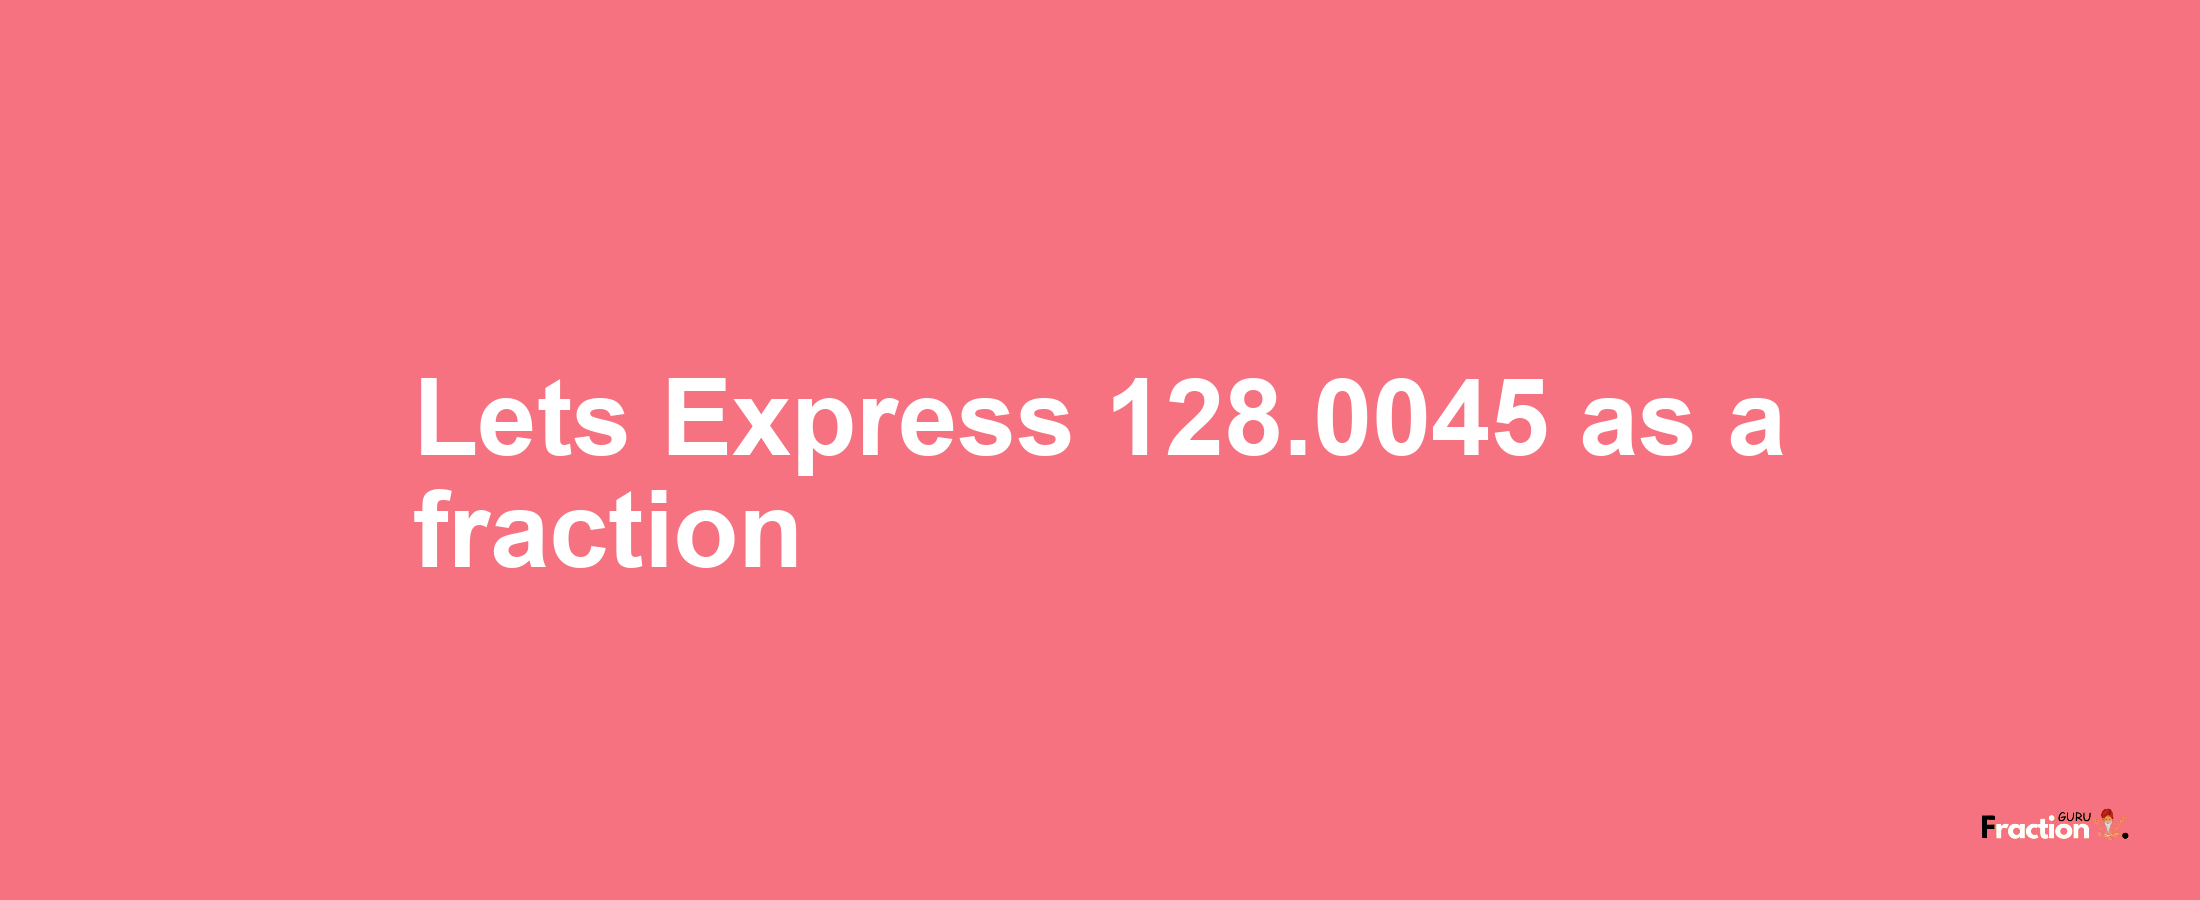 Lets Express 128.0045 as afraction